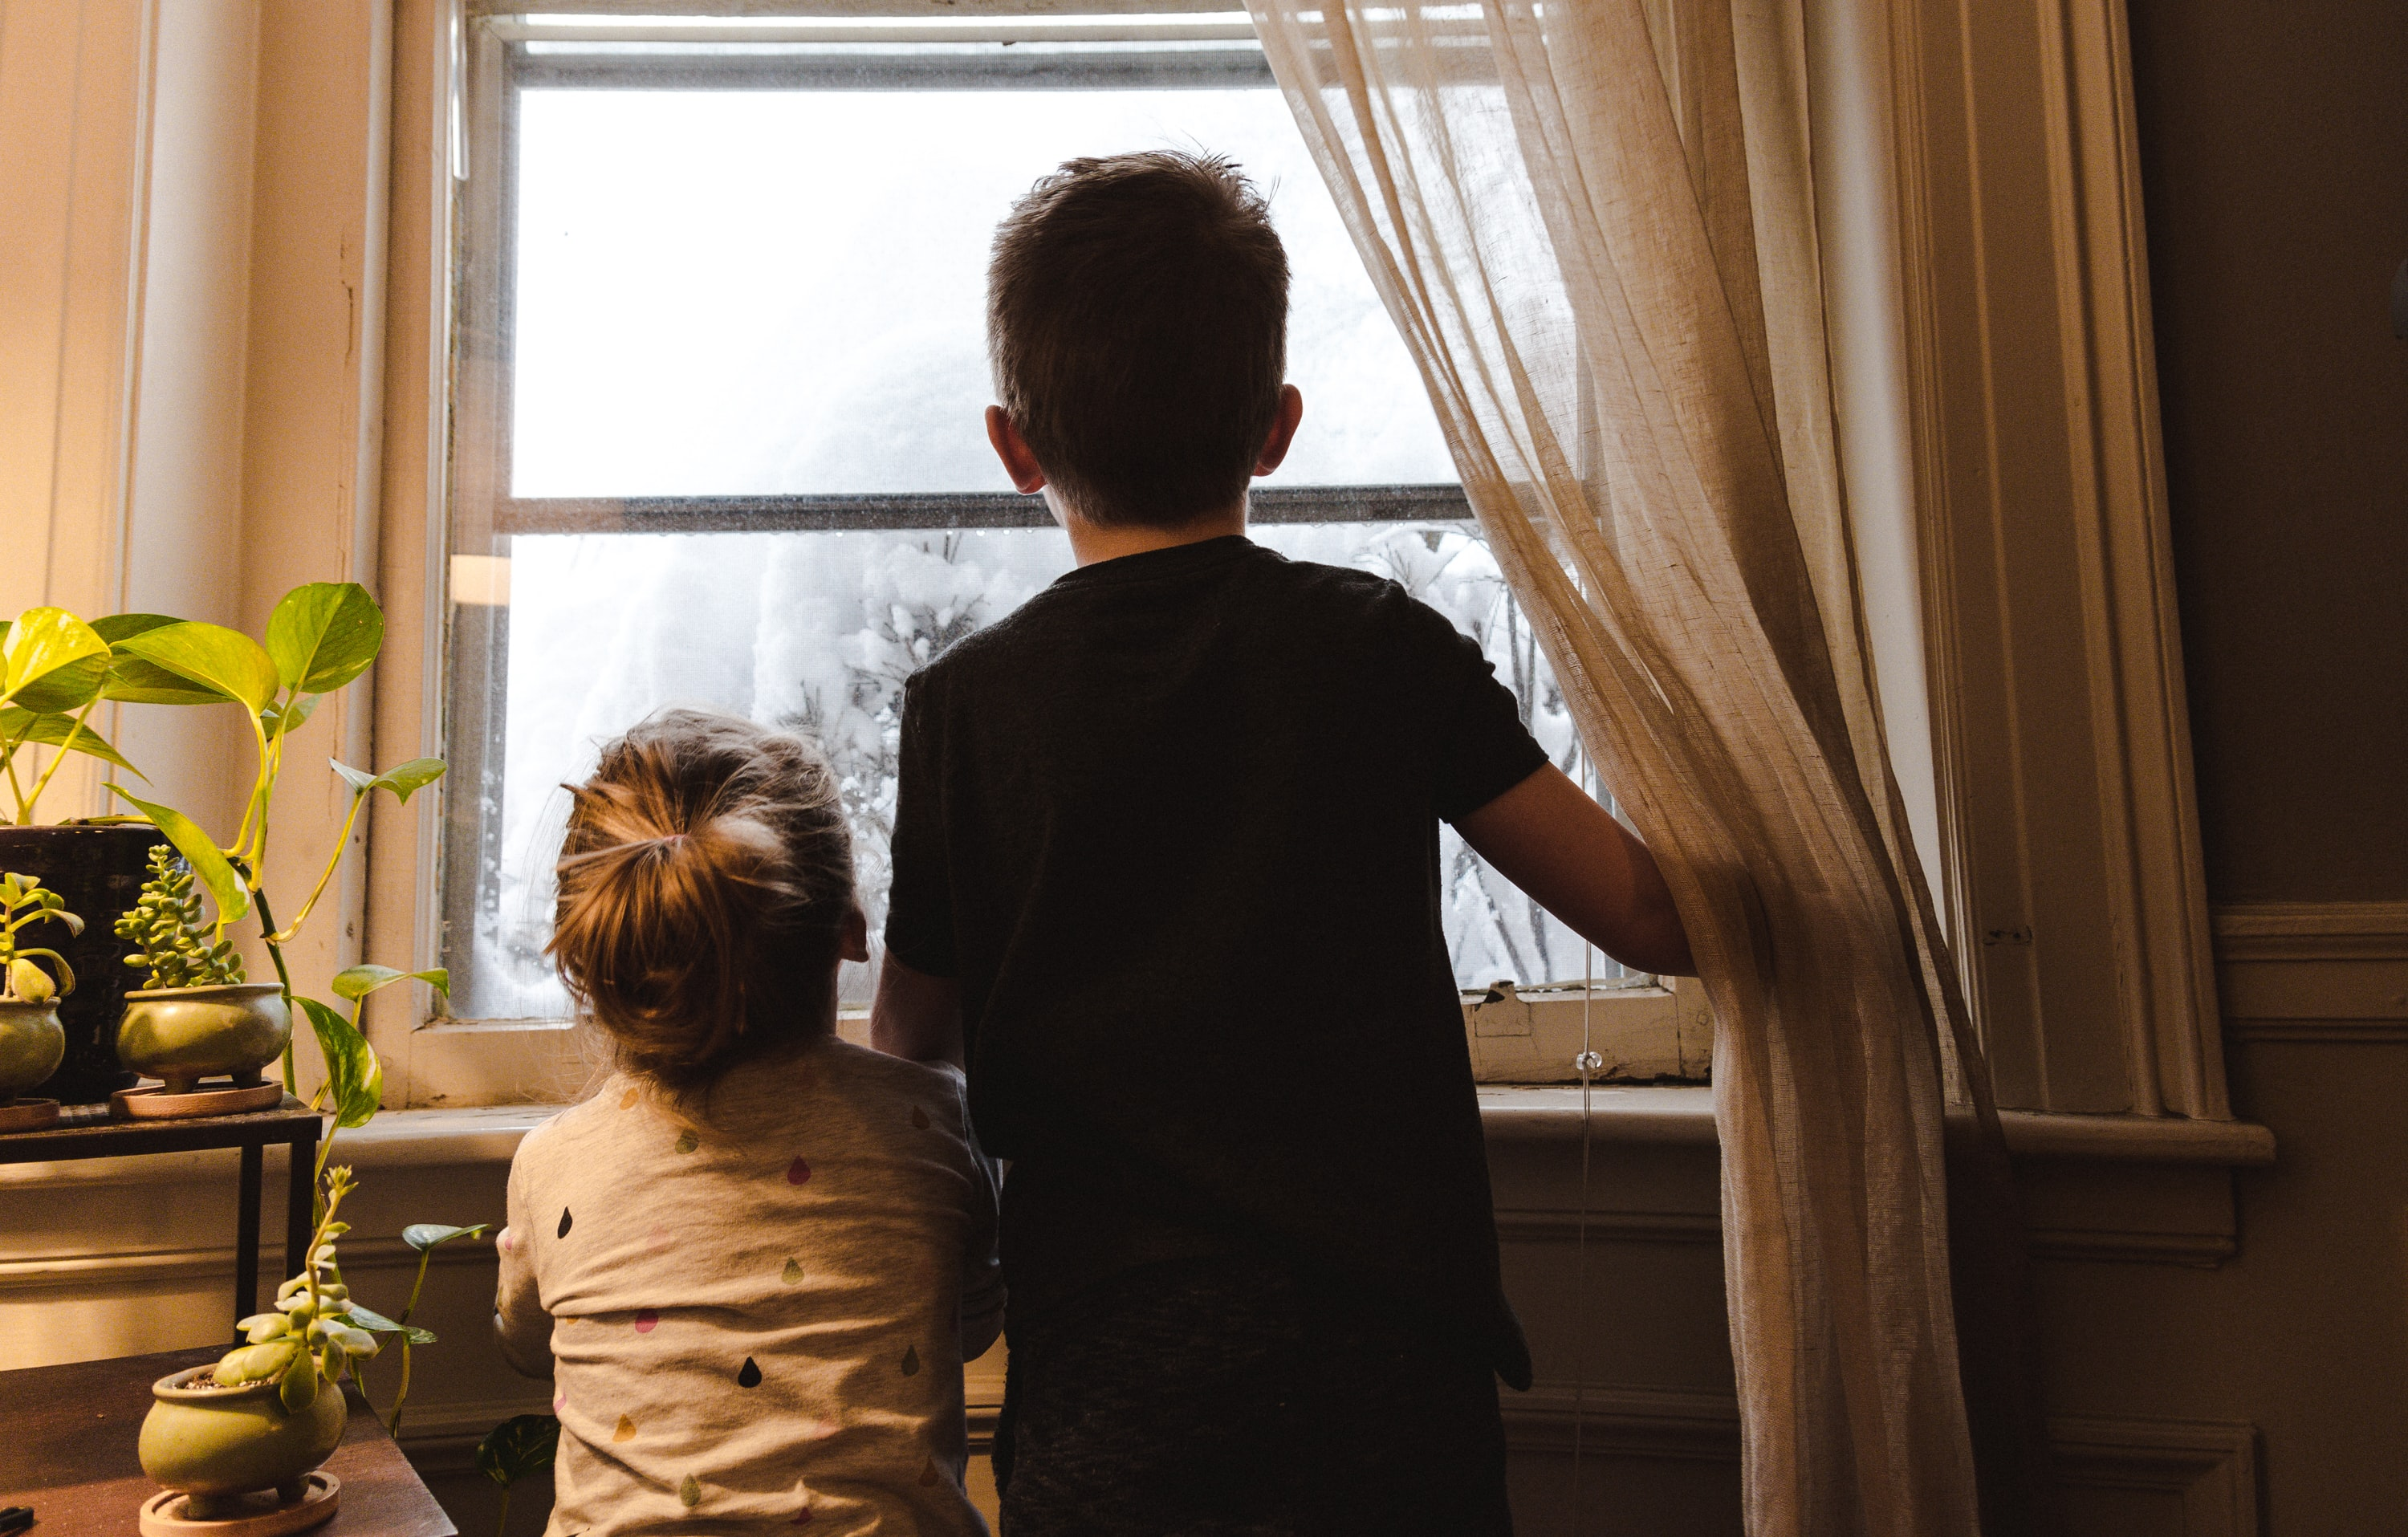 Image of two children looking at the window